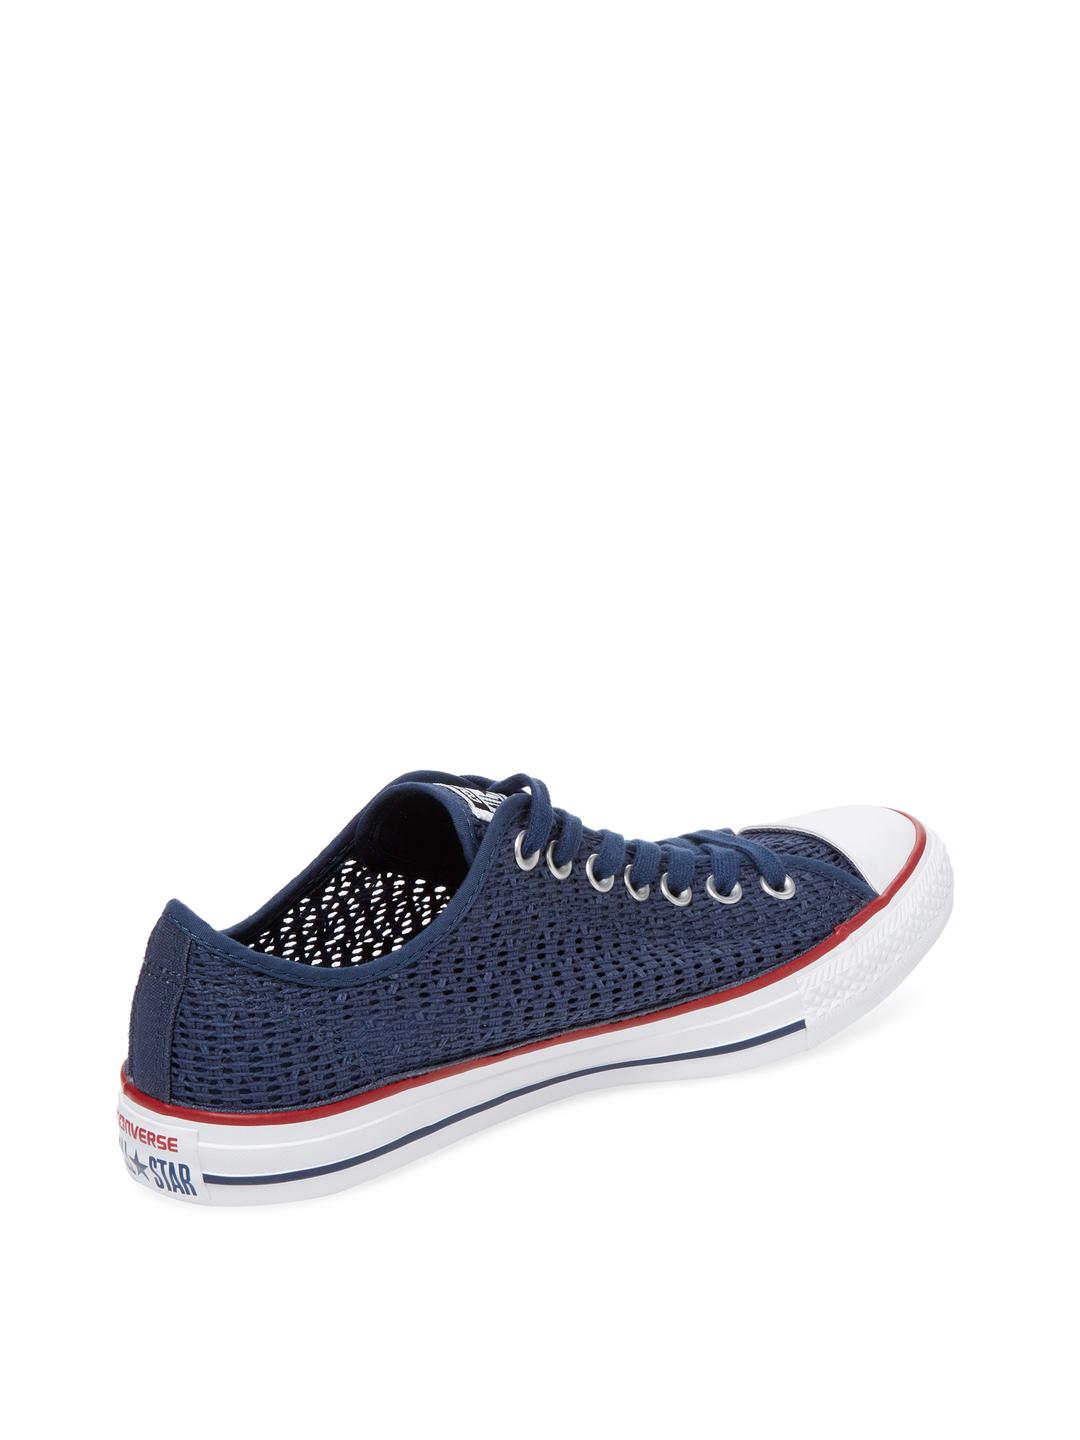 Converse Rubber Chuck Taylor All Star Woven Low Top Sneaker in  Navy/White/Black (Blue) for Men | Lyst